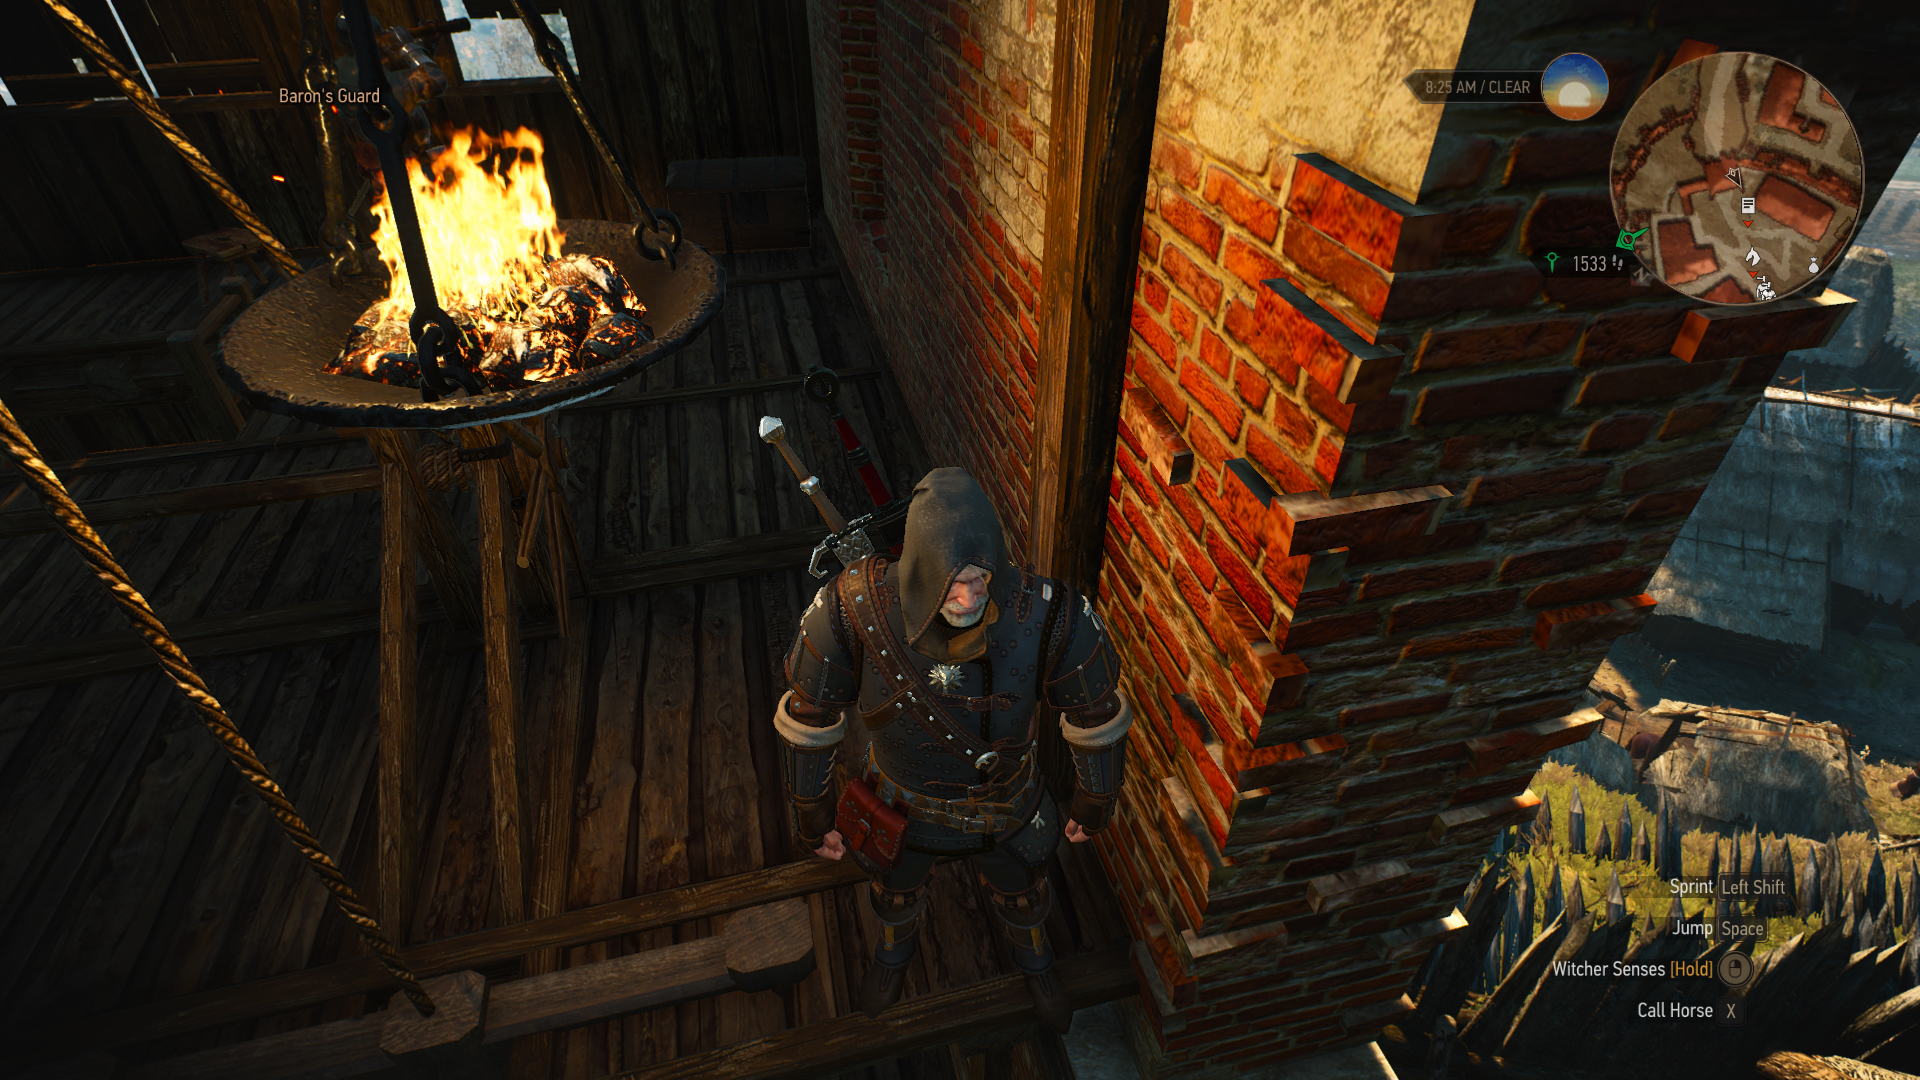 How to Get Mastercrafted Feline Witcher Gear in Witcher 3